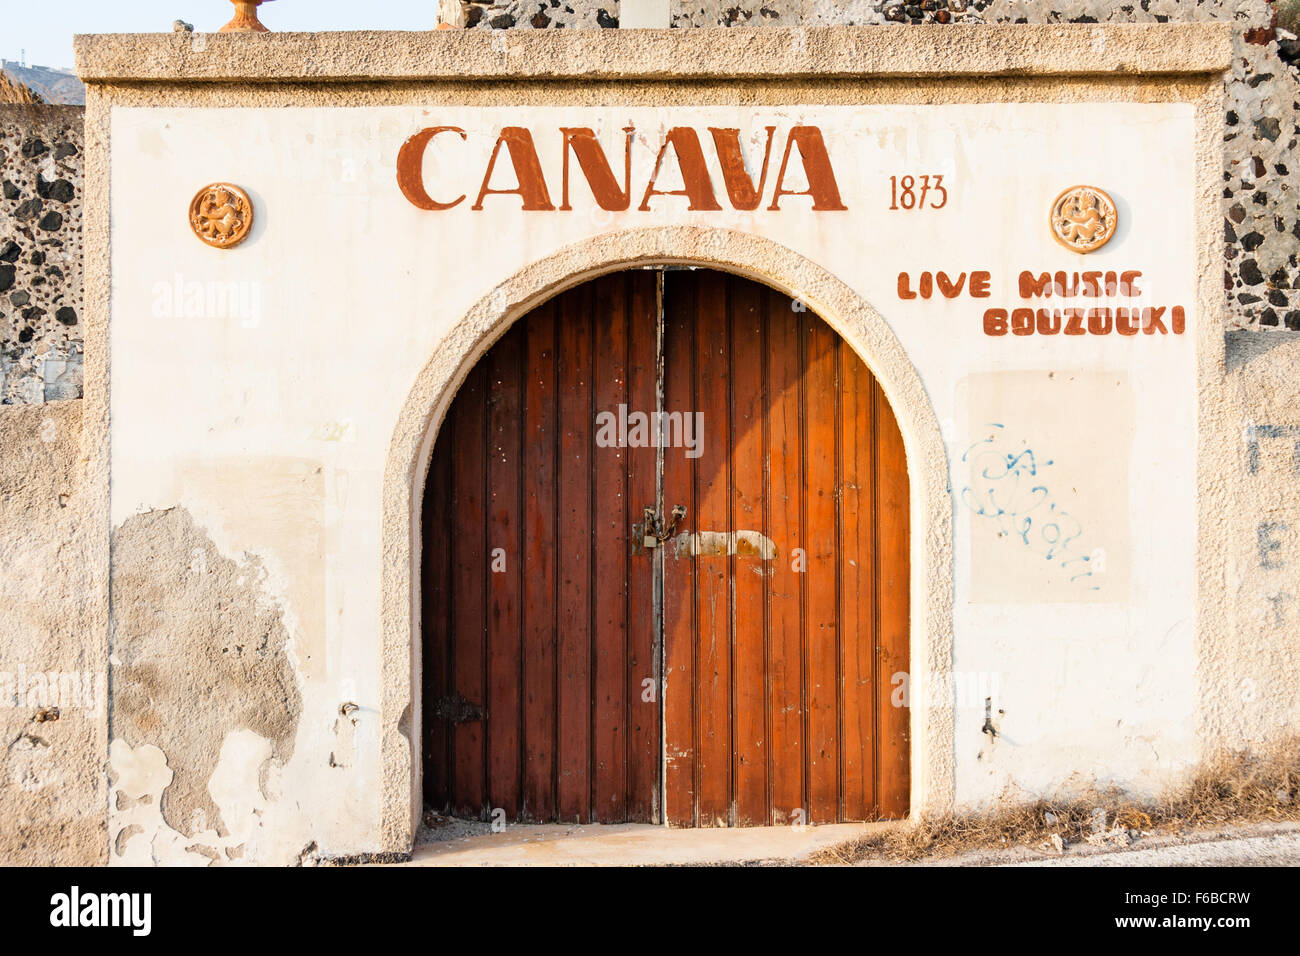 Santorini. Canava Roussos old winery, front main double wooden door, in old whitewashed wall with some broken rendering, early morning sunlight. Stock Photo